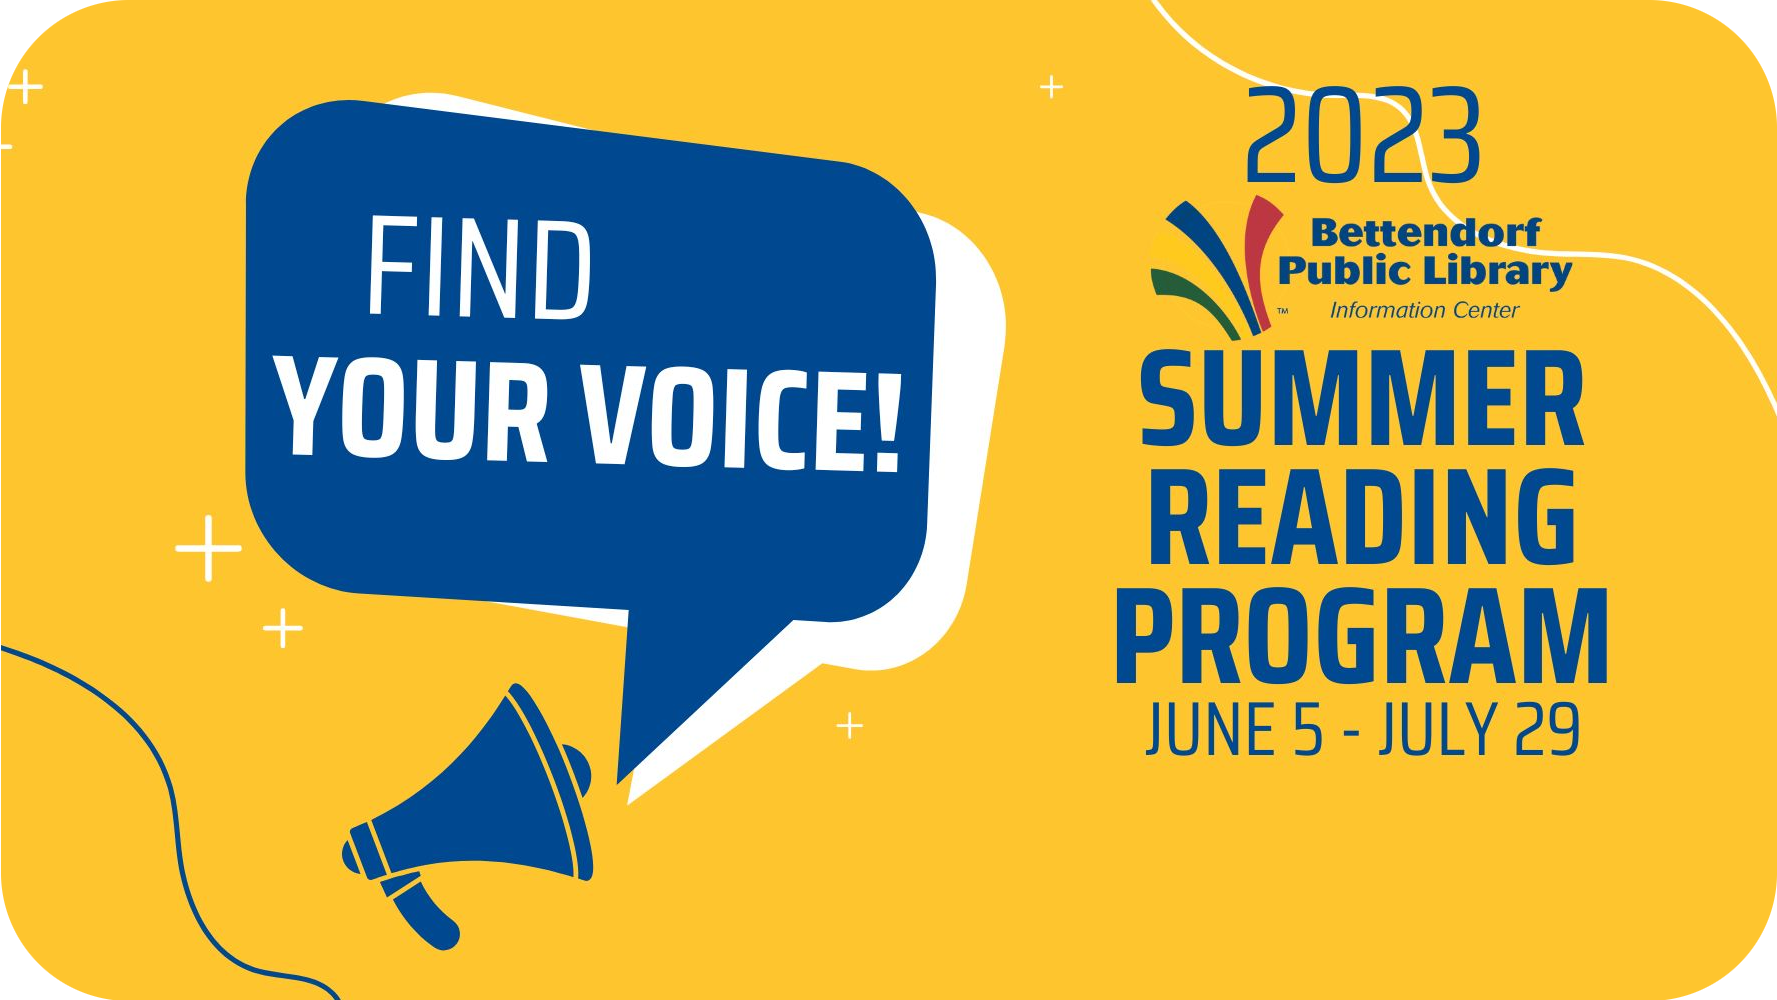 Find Your Voice summer reading program